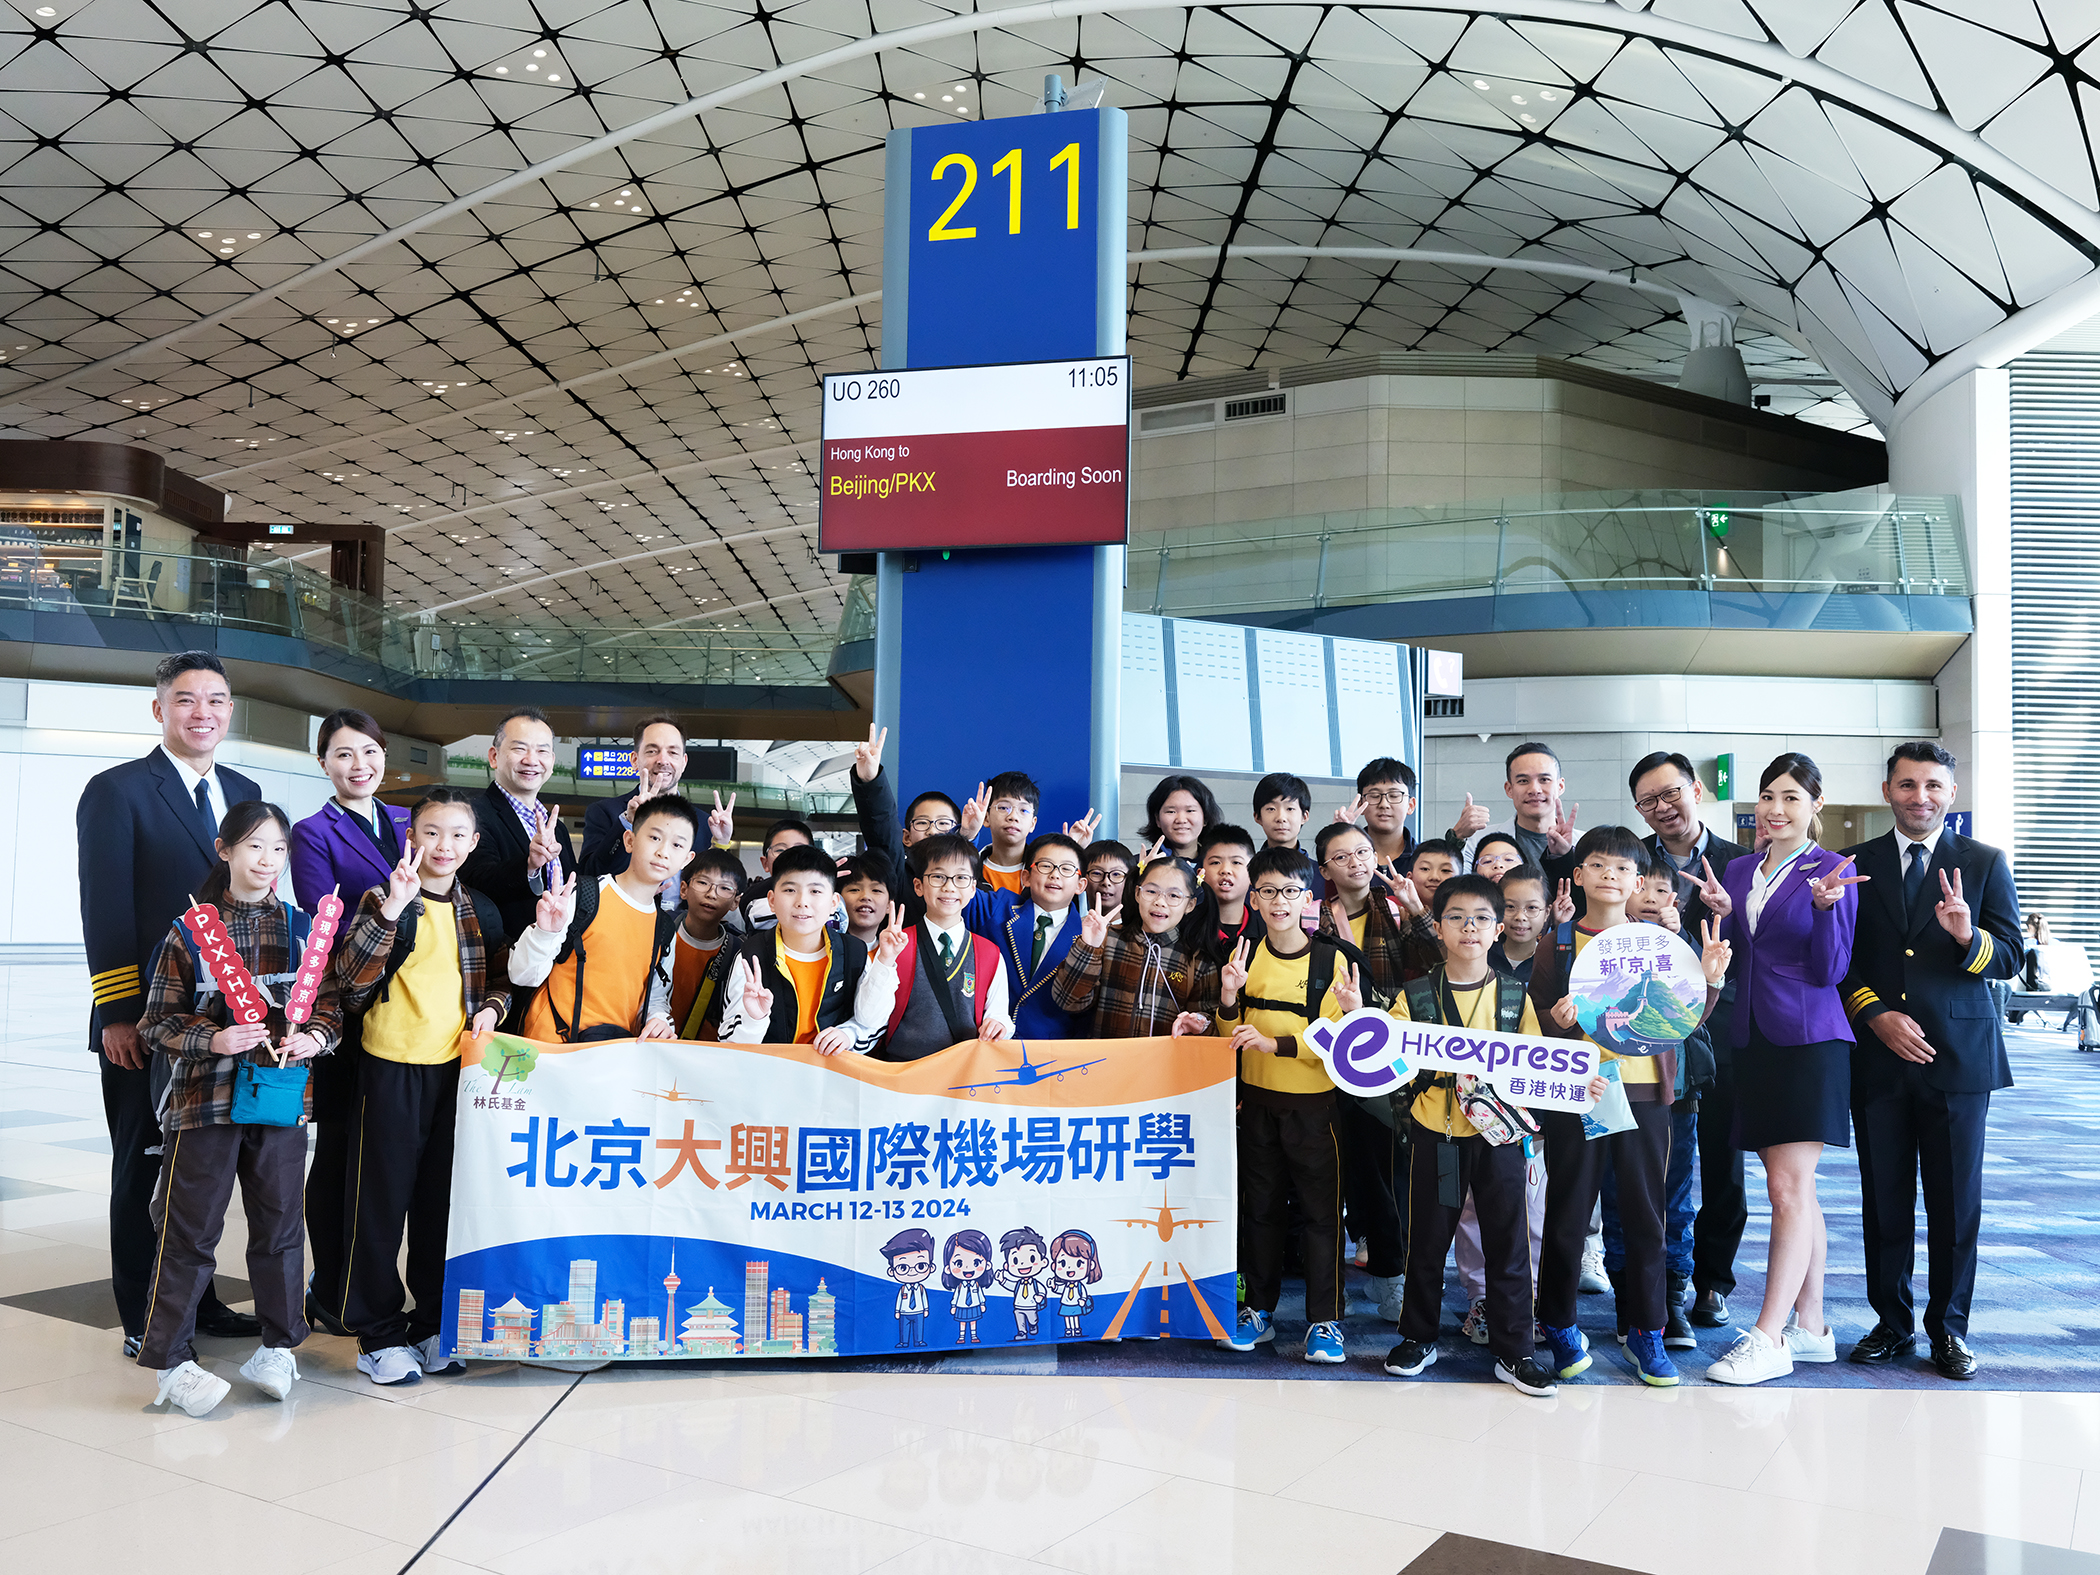 HK Express Inaugurates New Route to Beijing Daxing Today